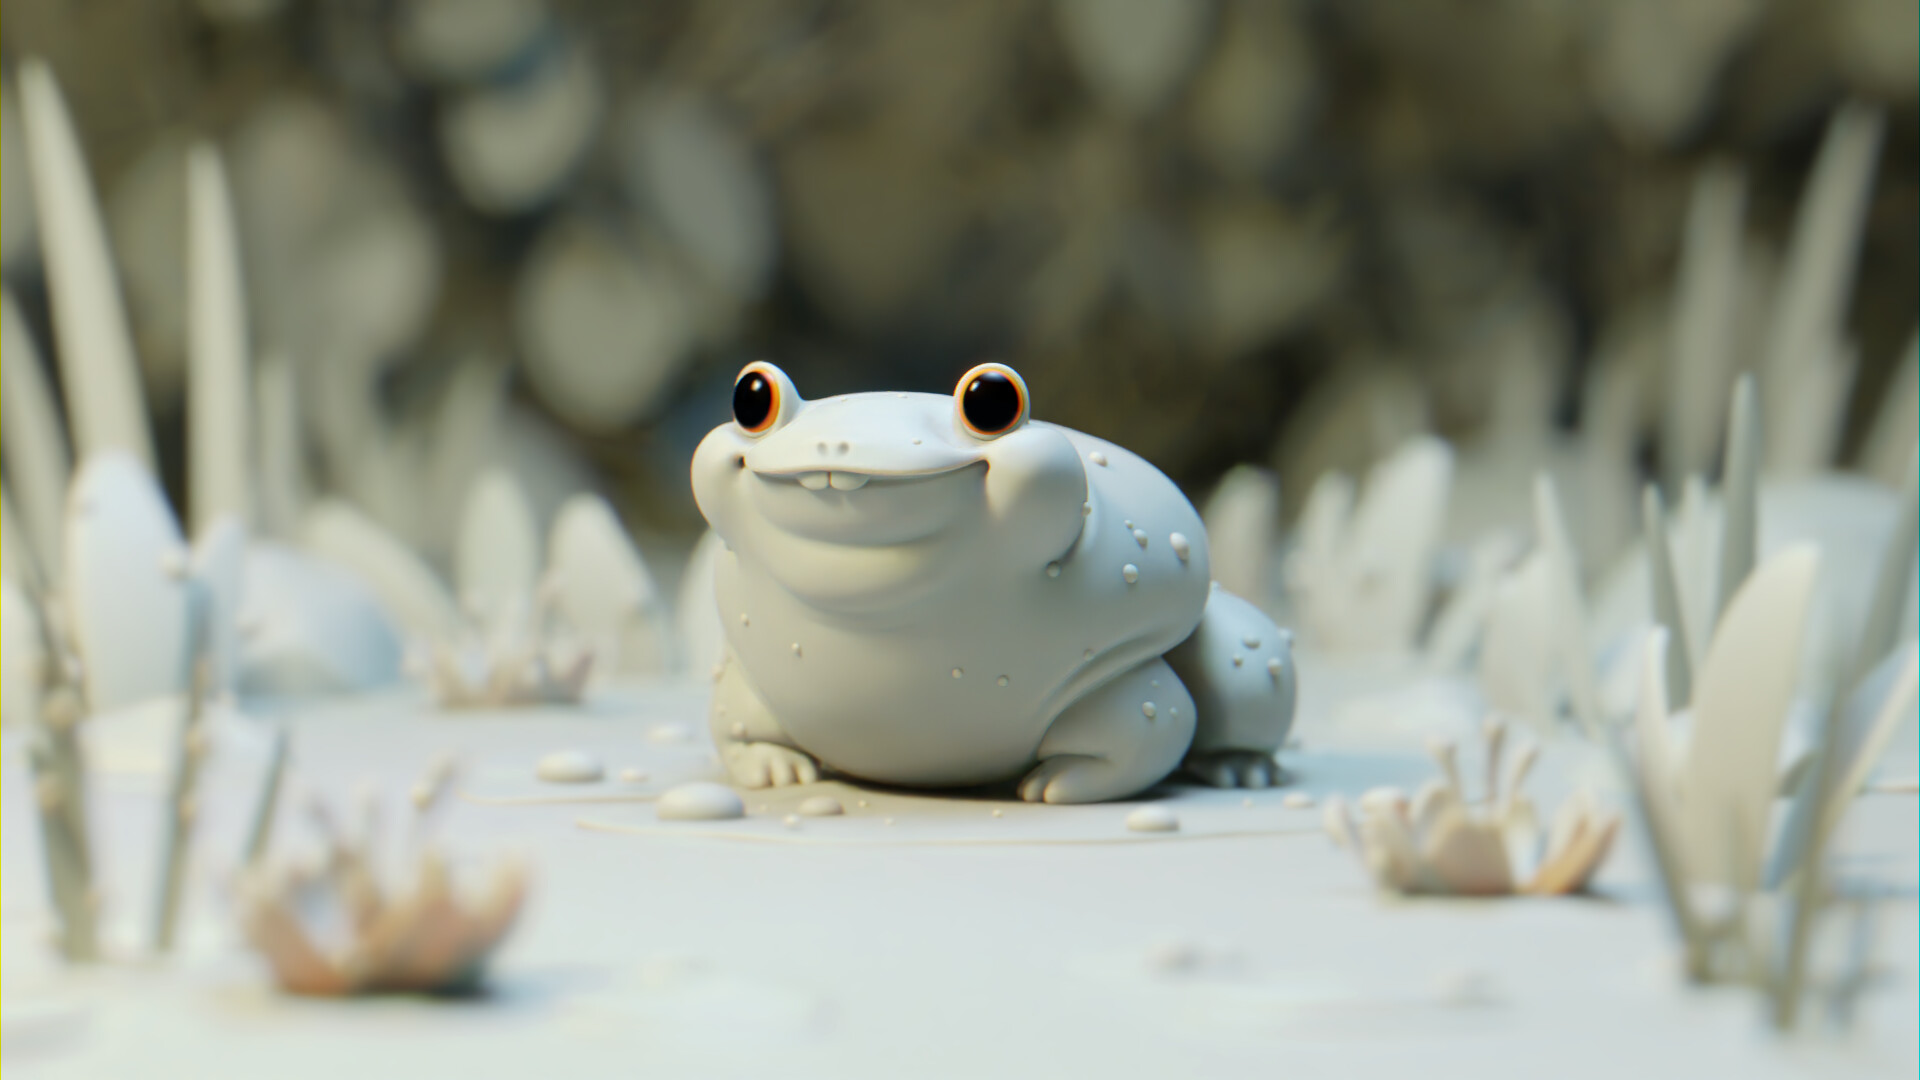 Cute frog - Finished Projects - Blender Artists Community